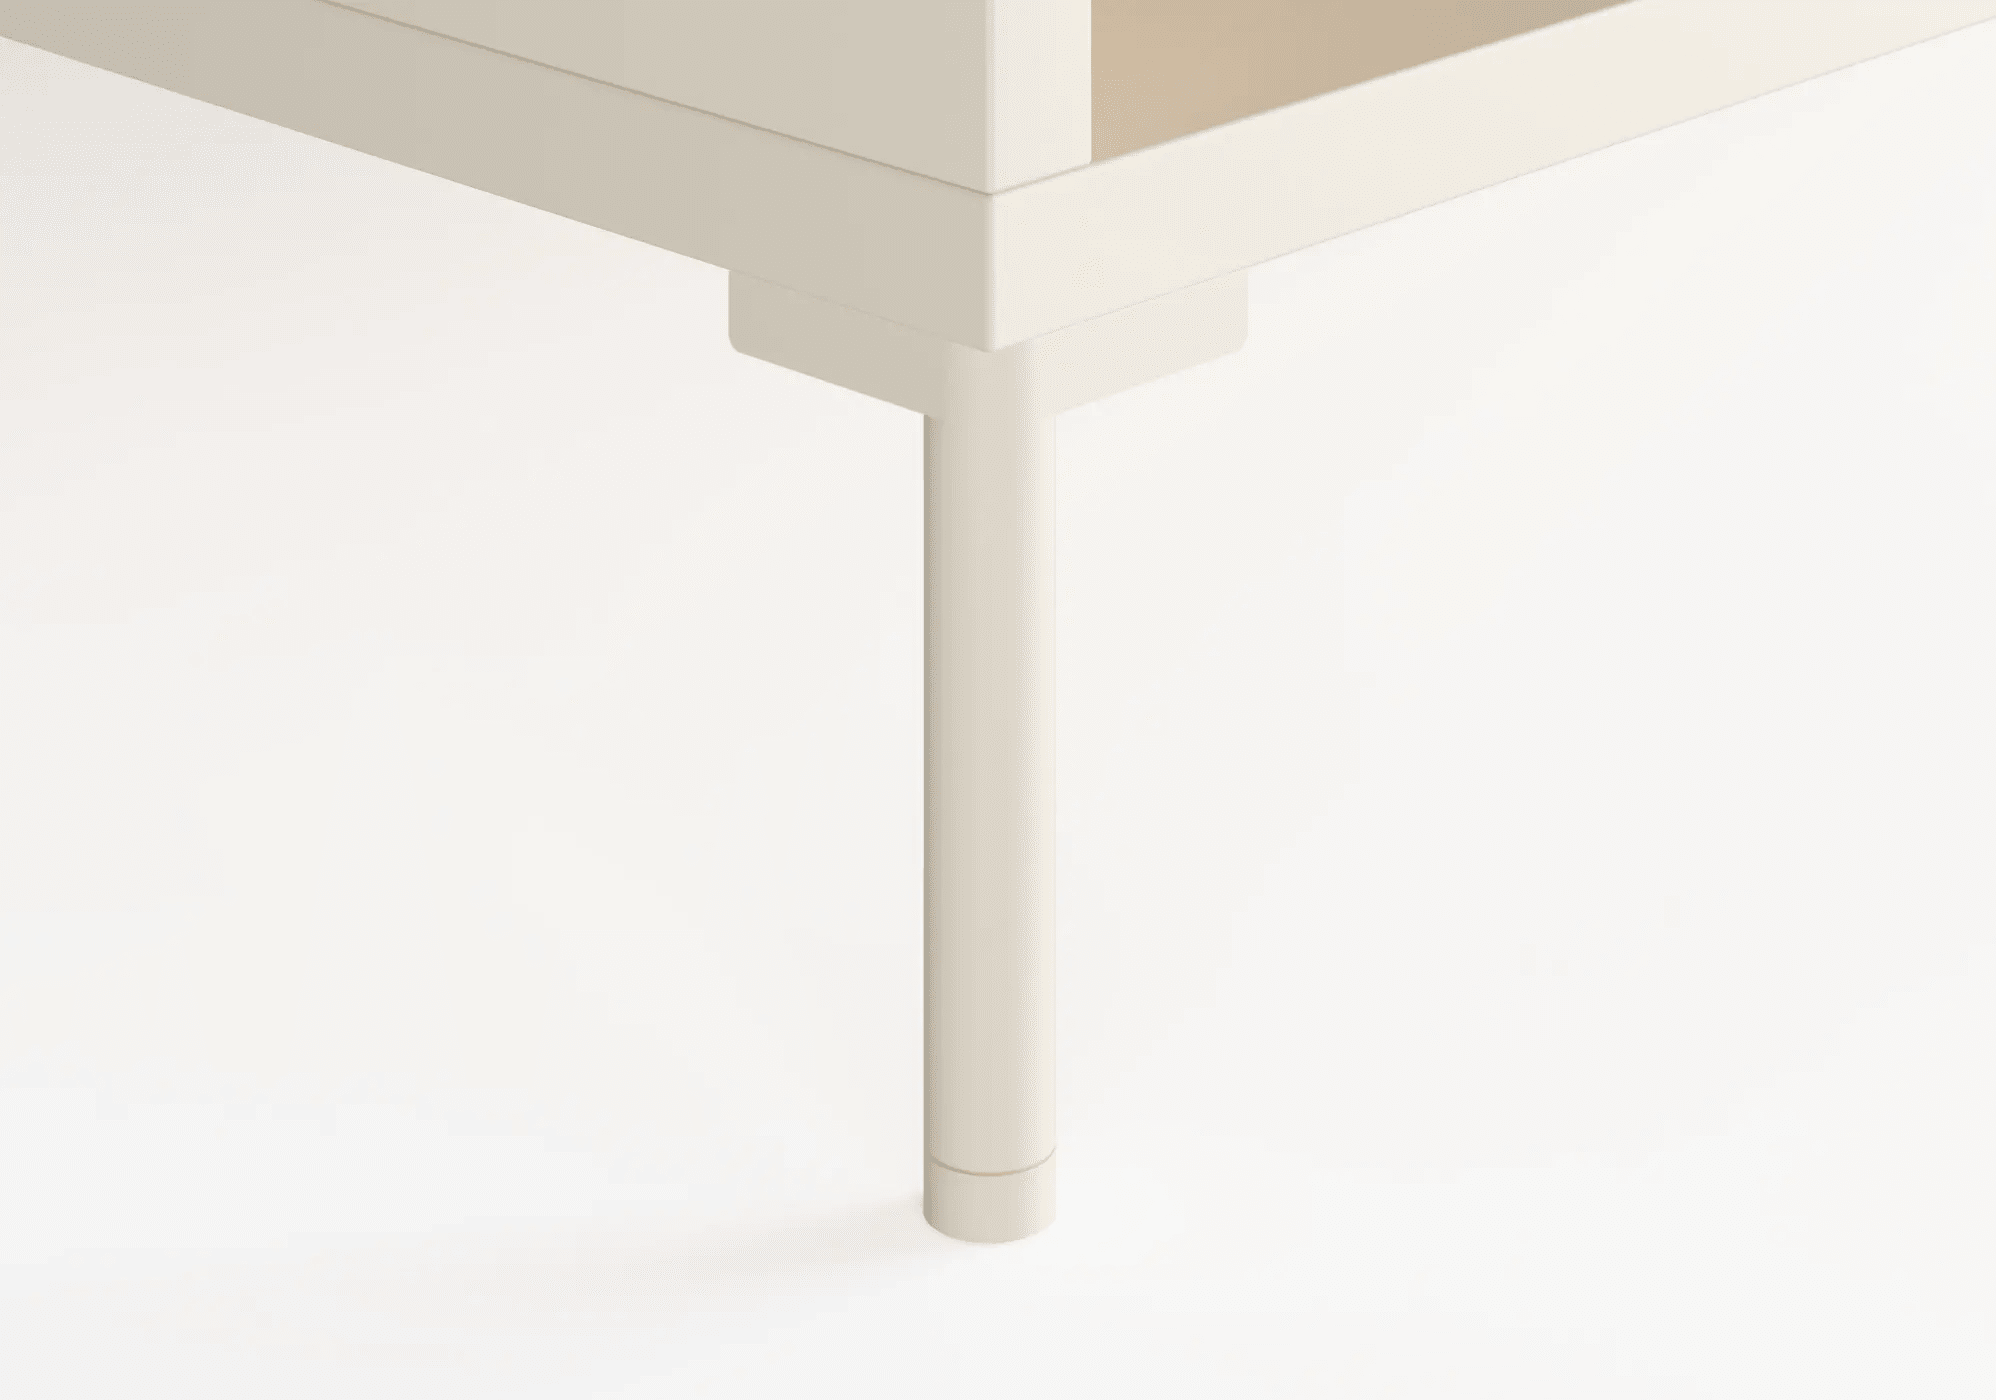 Large Cotton Beige Bedside Table with Drawers, Backpanels and Legs - 78x53x40cm 8